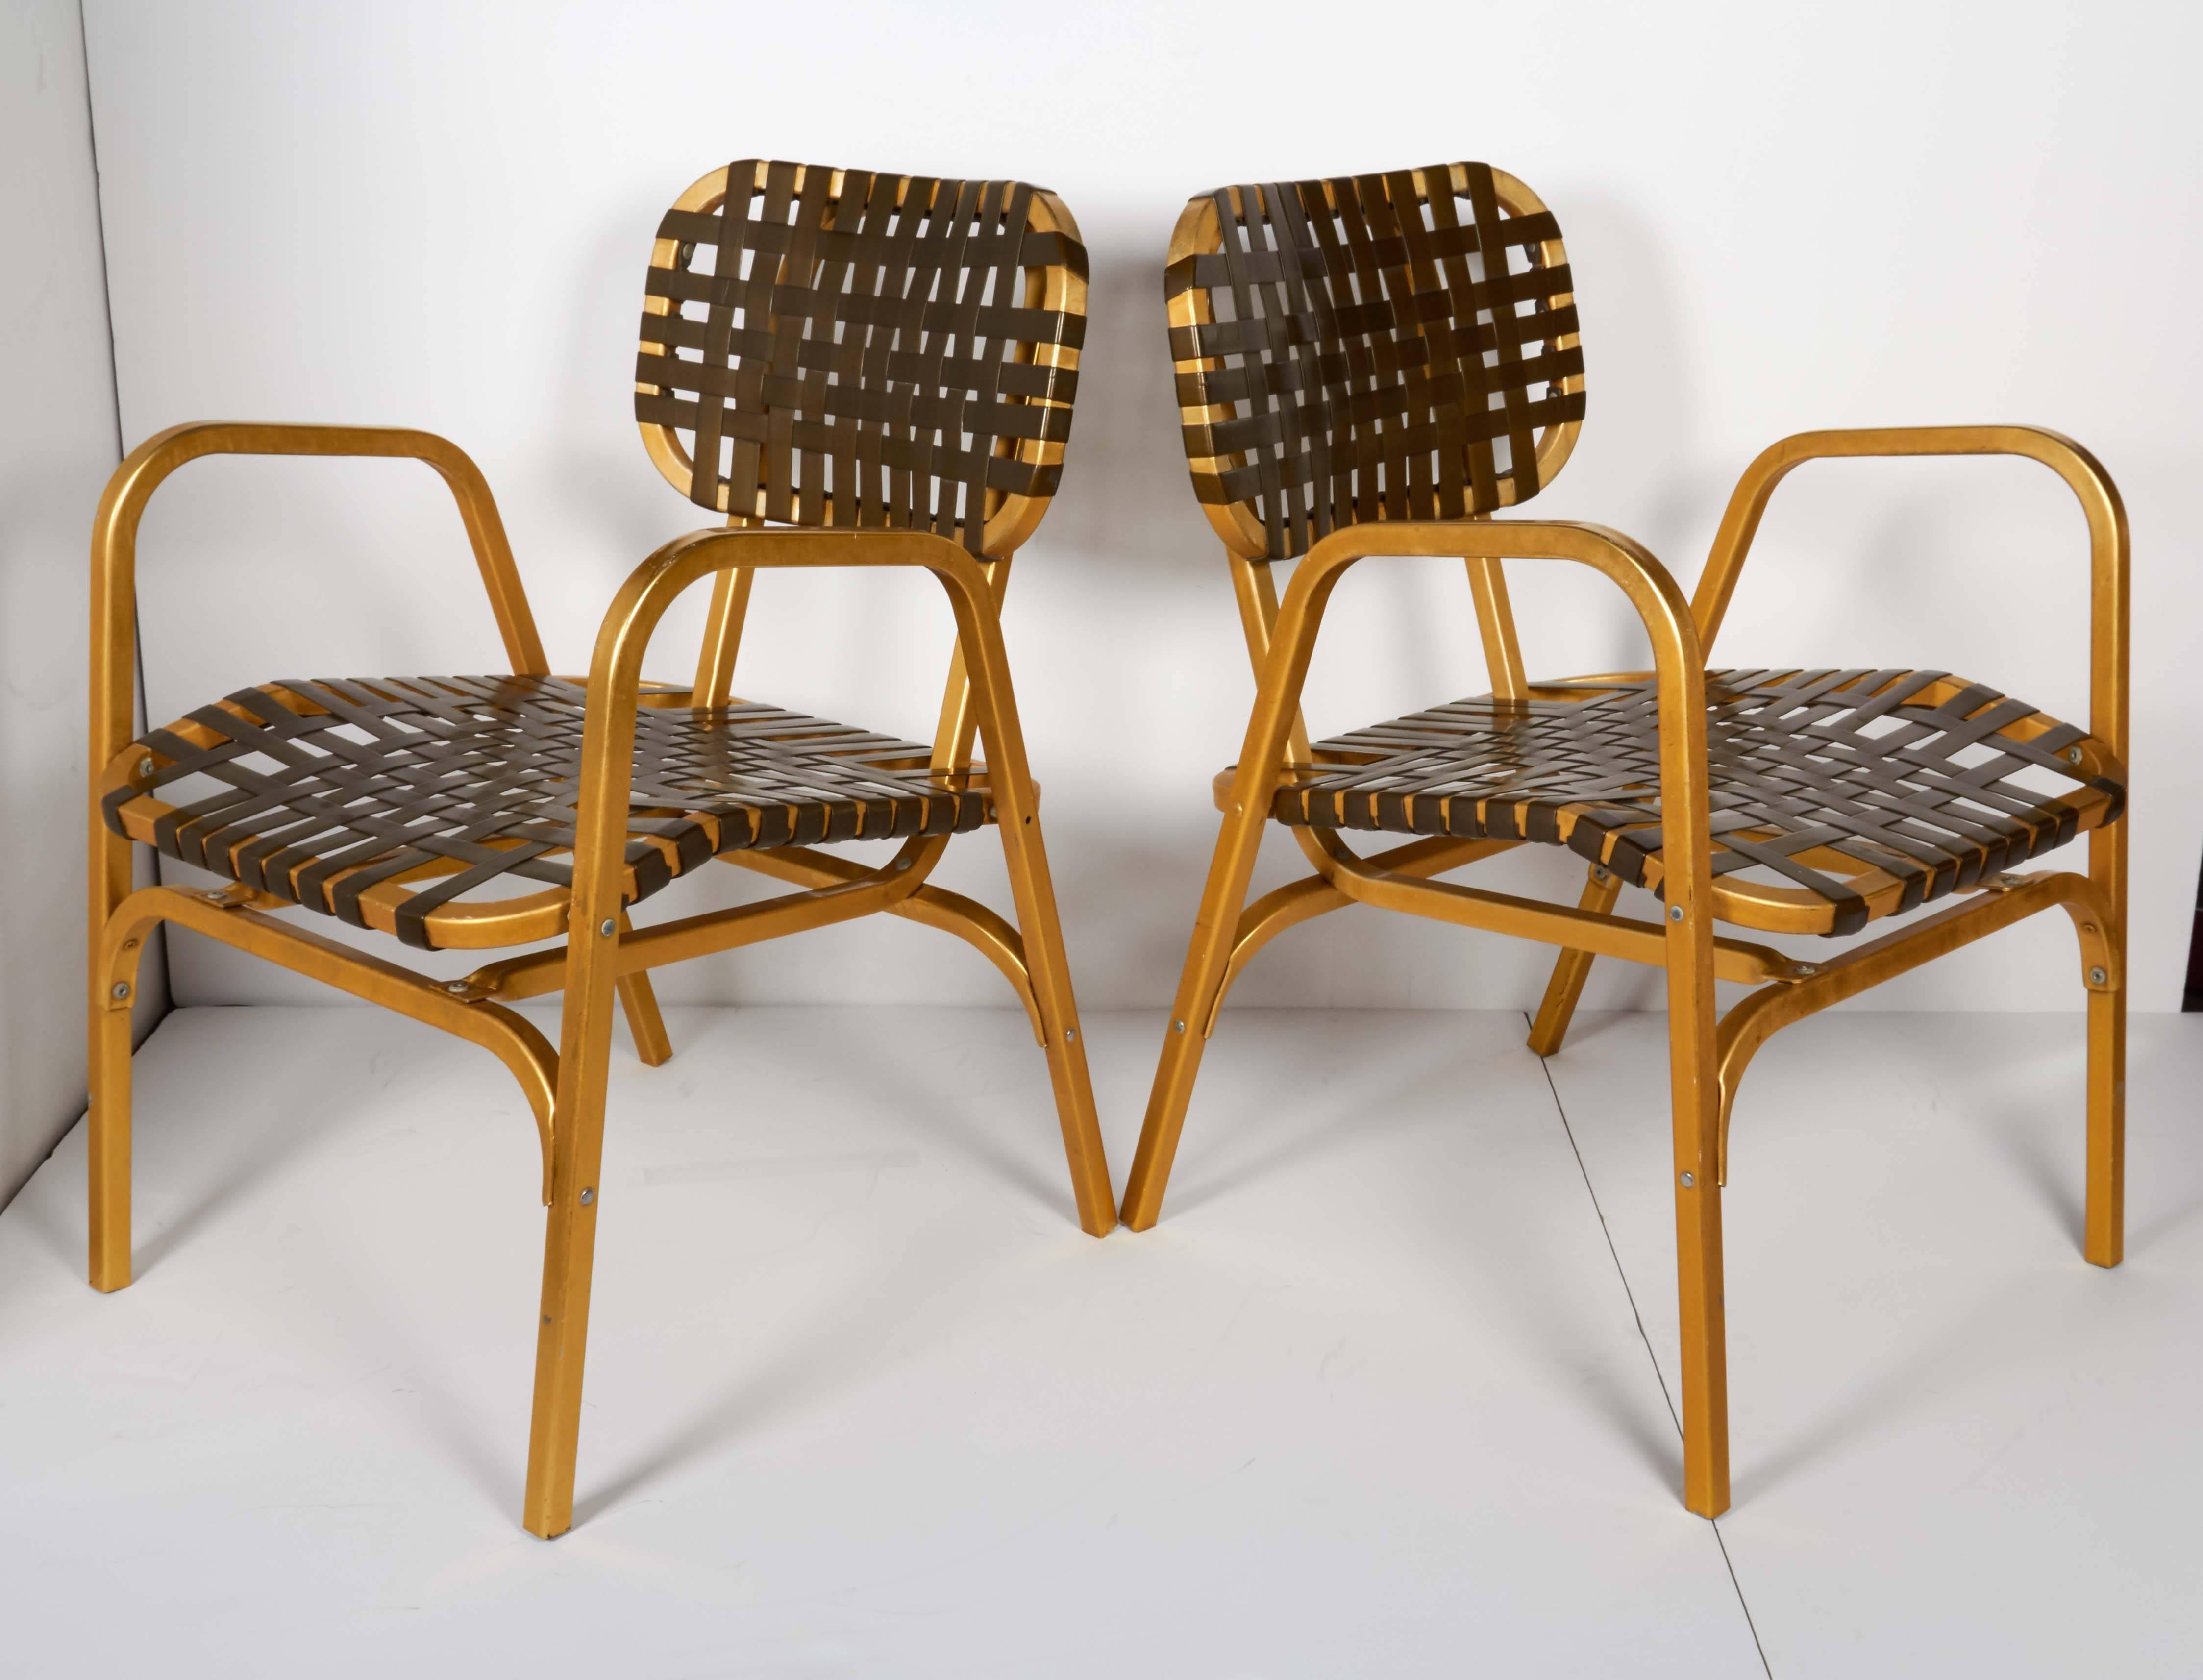 American Pair of 1950's Mid-Century Modern Leisure Garden or Patio Chairs